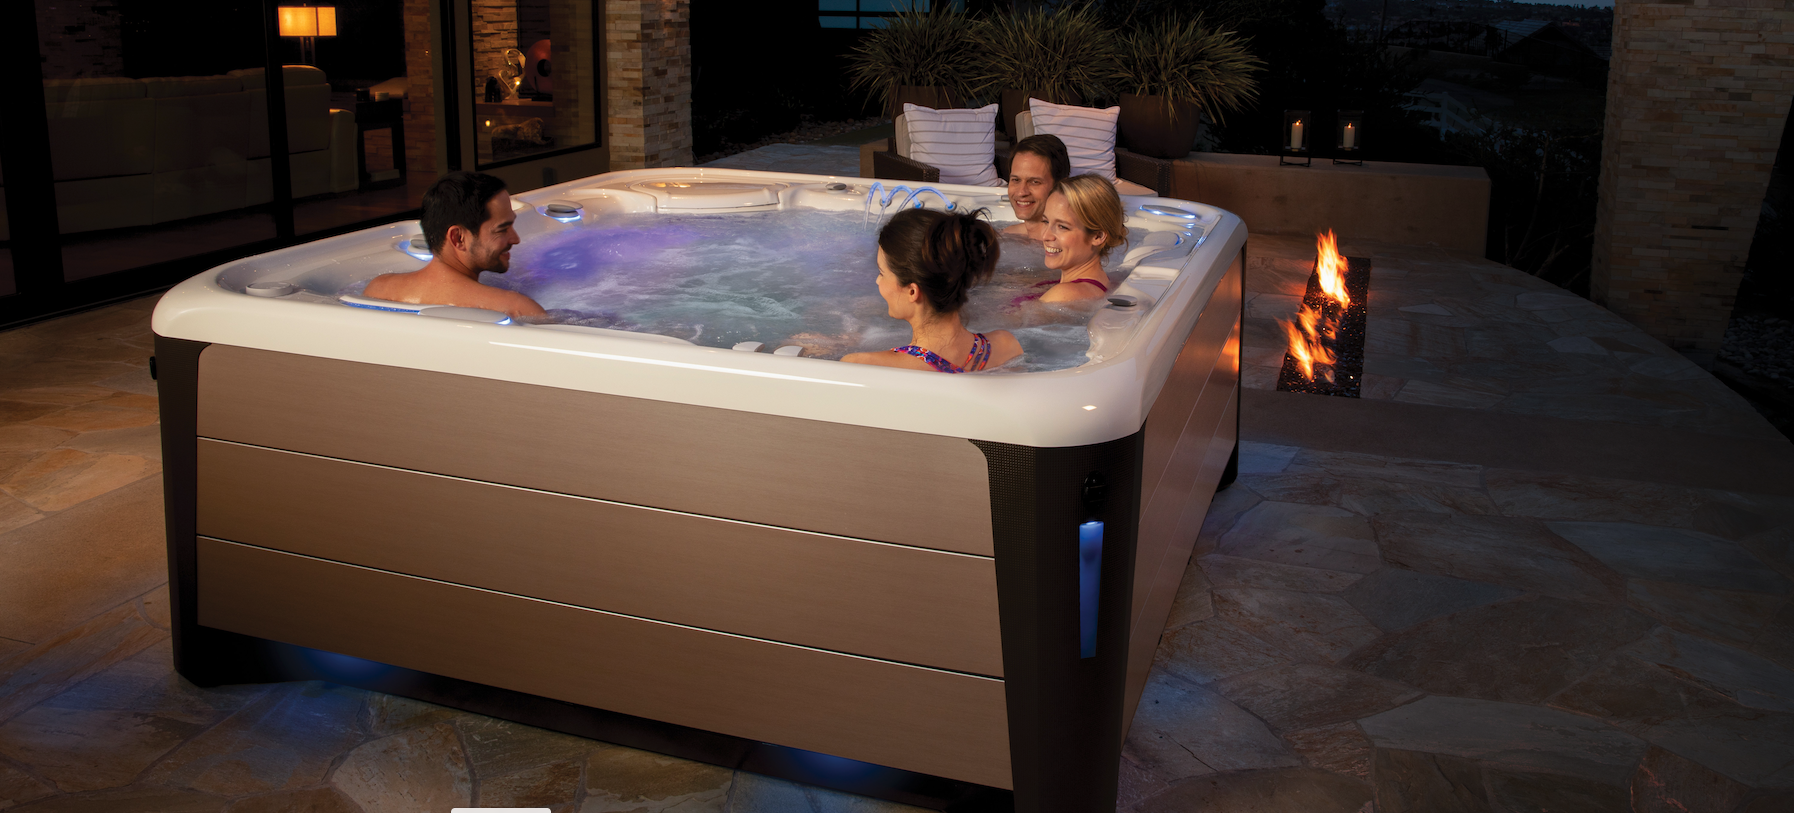 How To Throw A Hot Tub Party